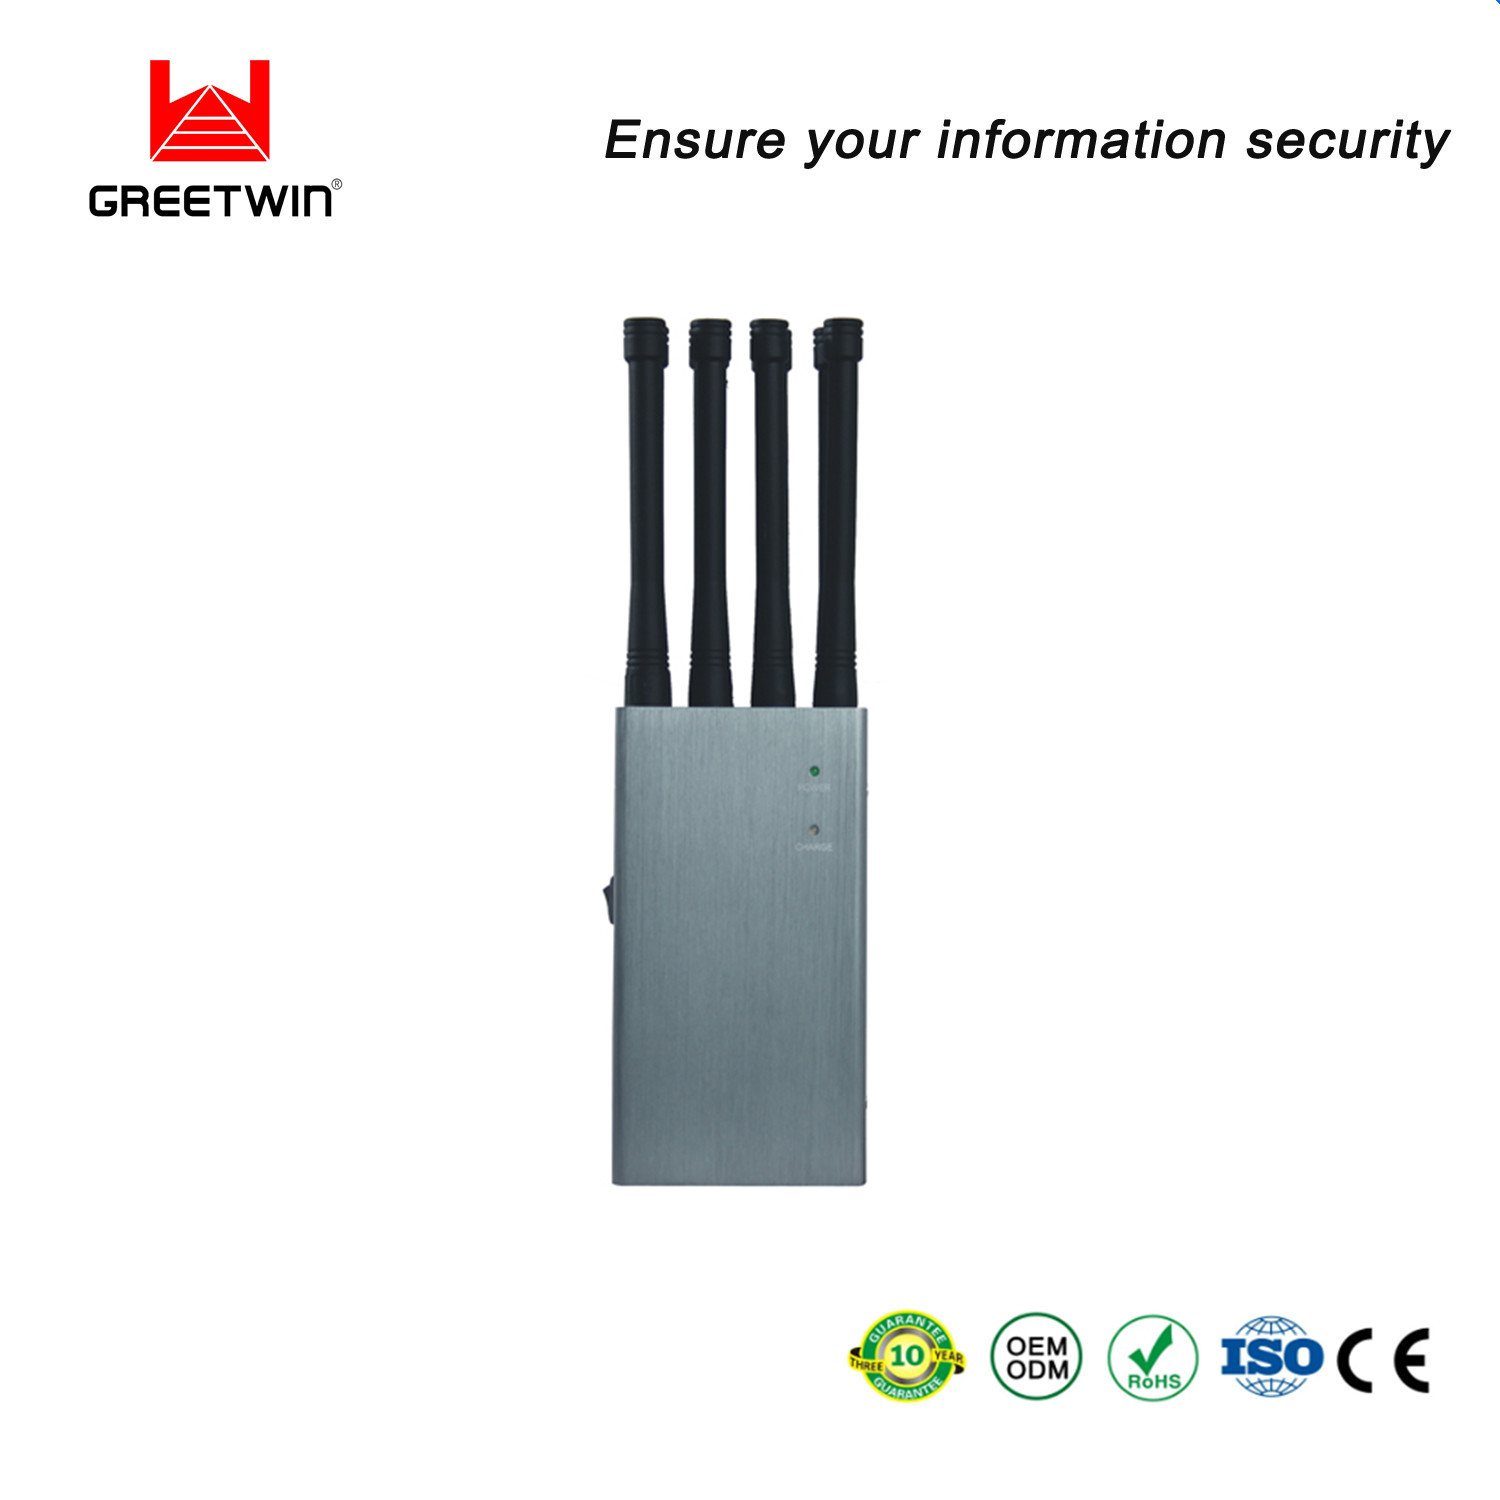 8.0W Wireless Signal GSM GPS WiFi Jammer 8 Bands Handheld